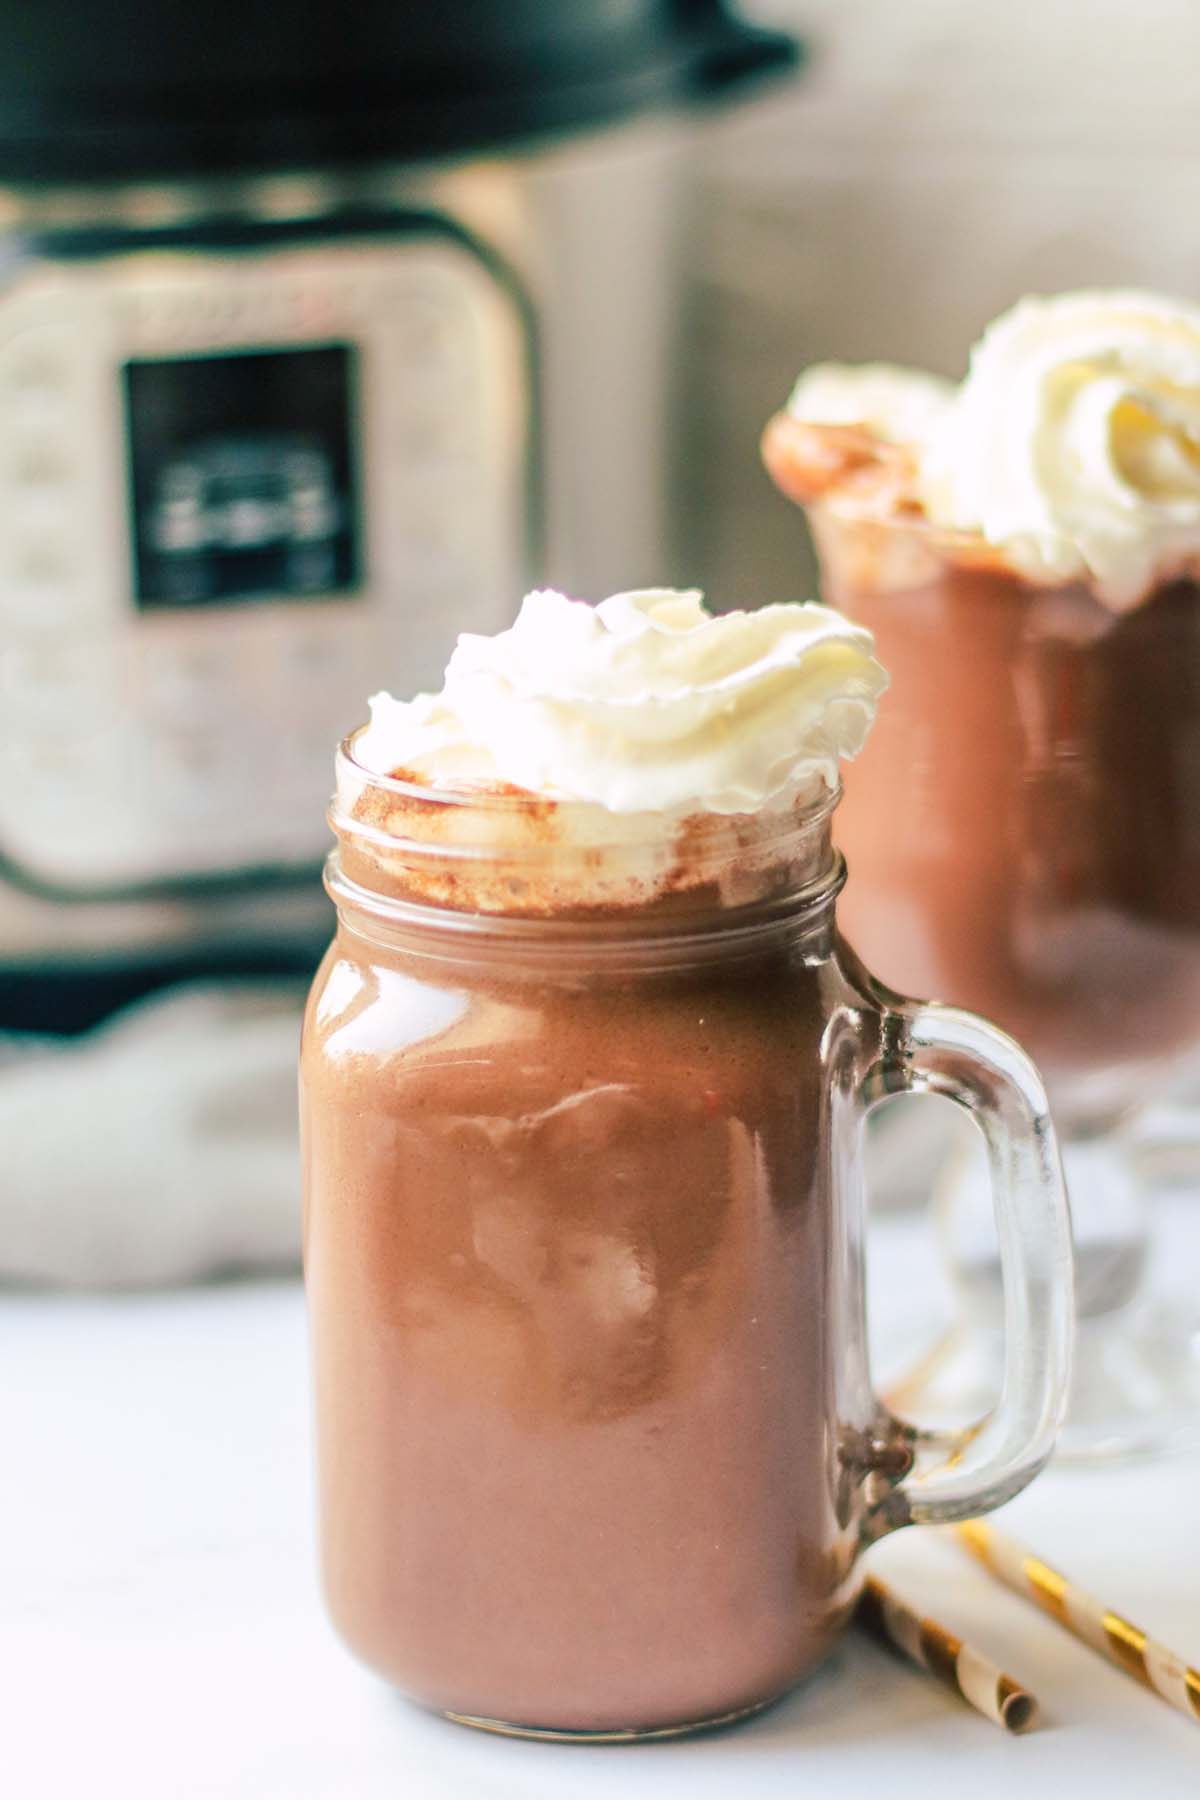 hot chocolate topped with whipped cream in front of the Instant Pot.